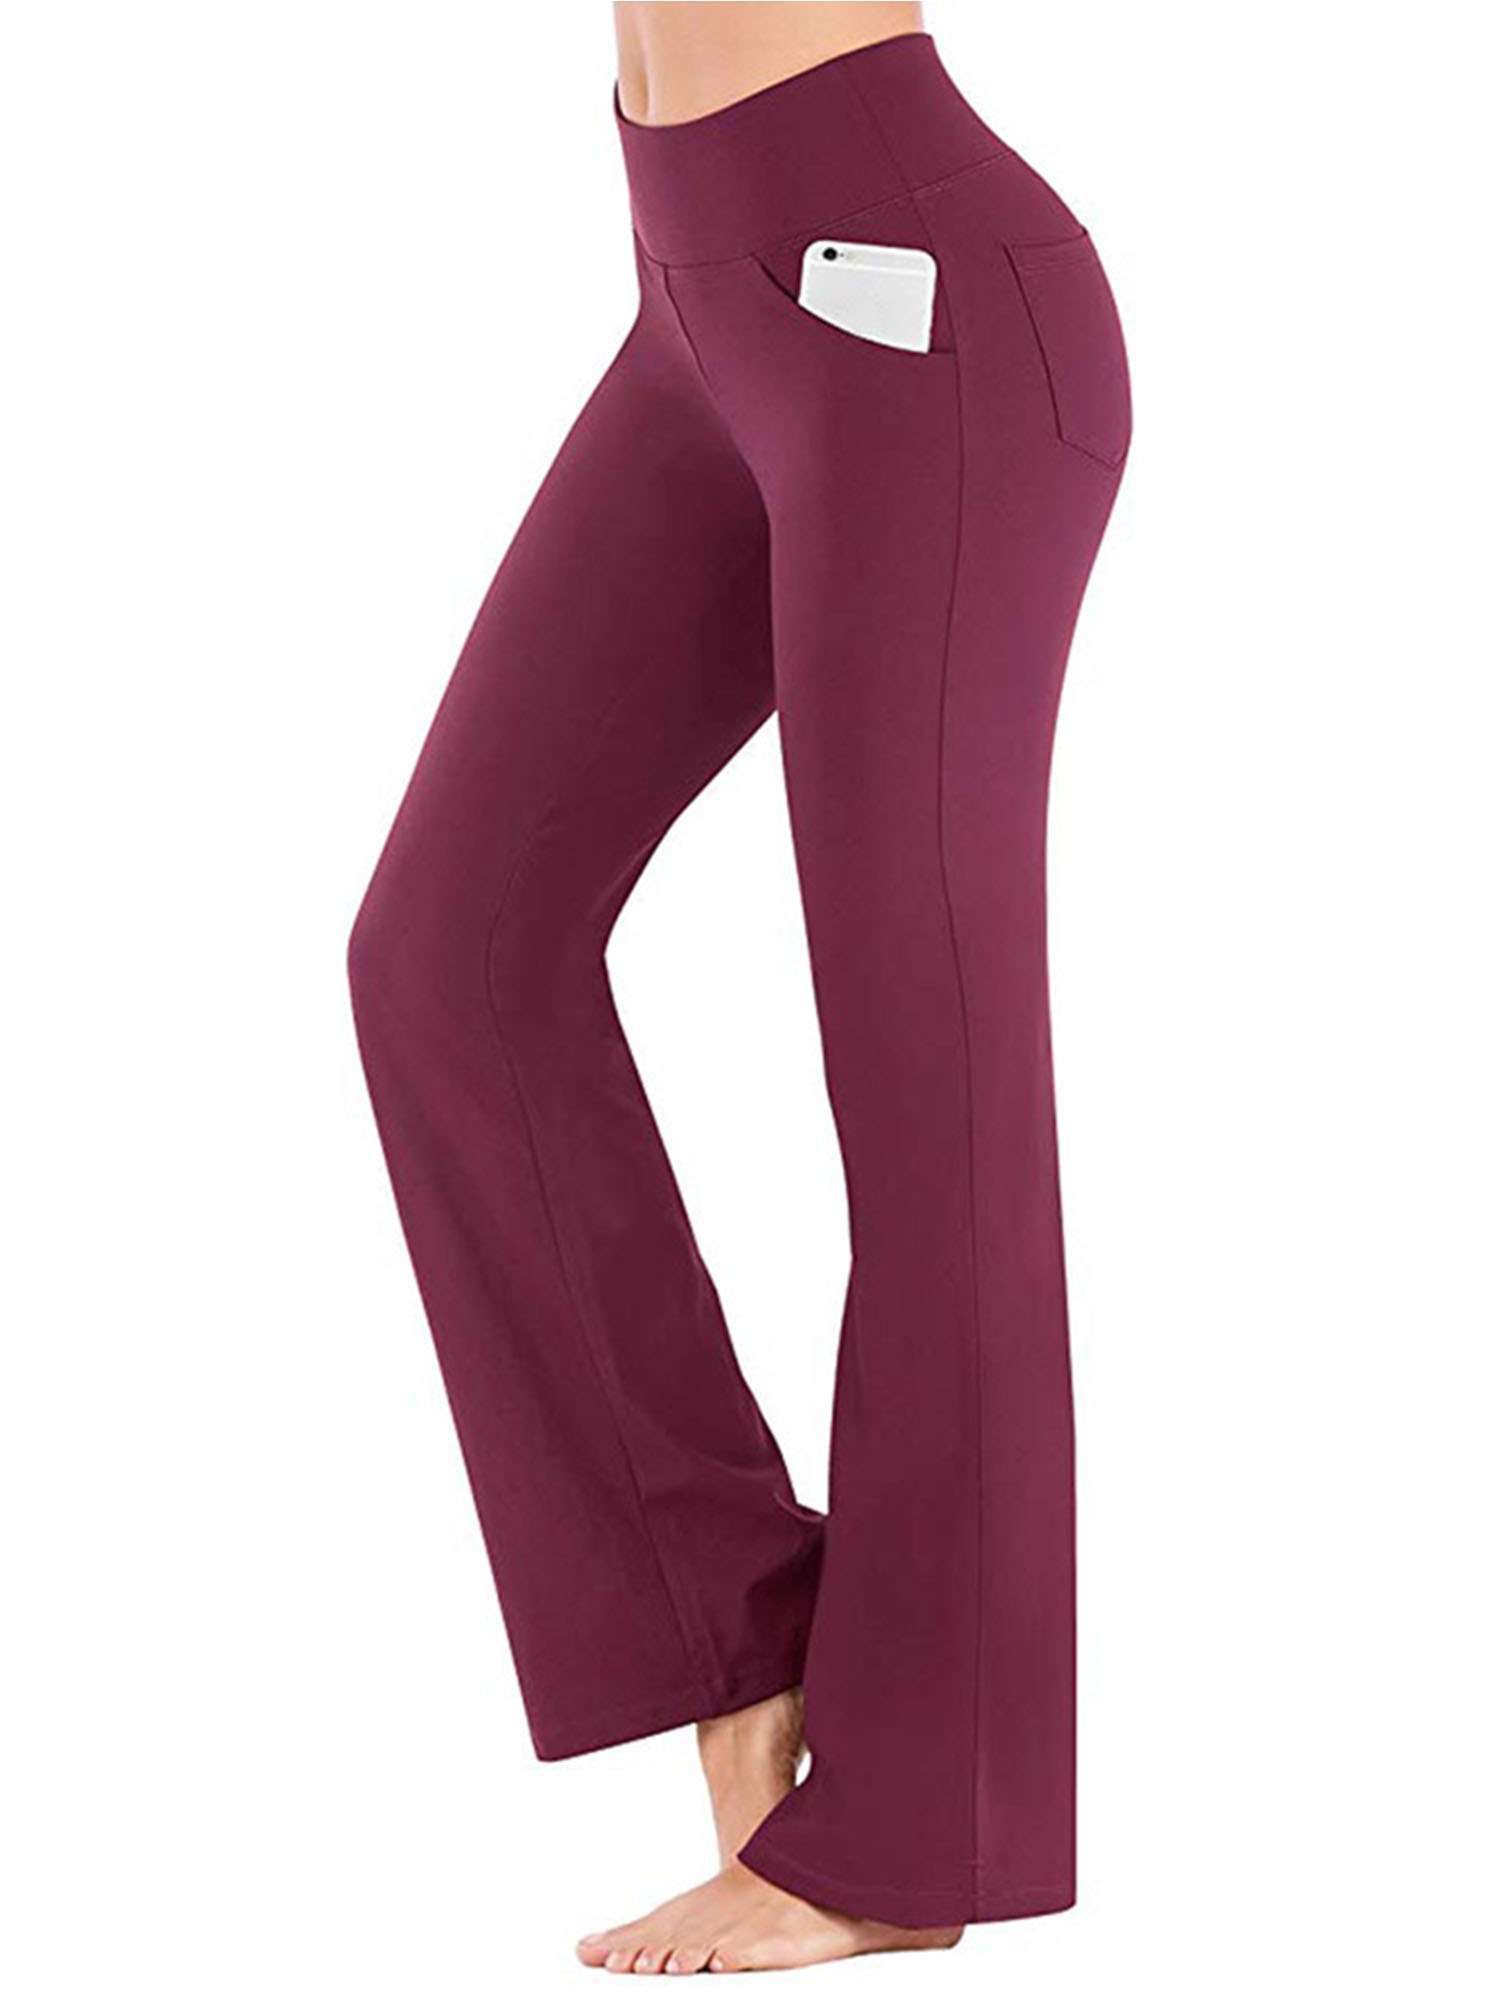 Bootcut Workout Leggings Pants with Pocket Women Ladies Casual Flare Dress Pants Plus Size High Waist Stretch Excises Trousers Activewear - image 1 of 6